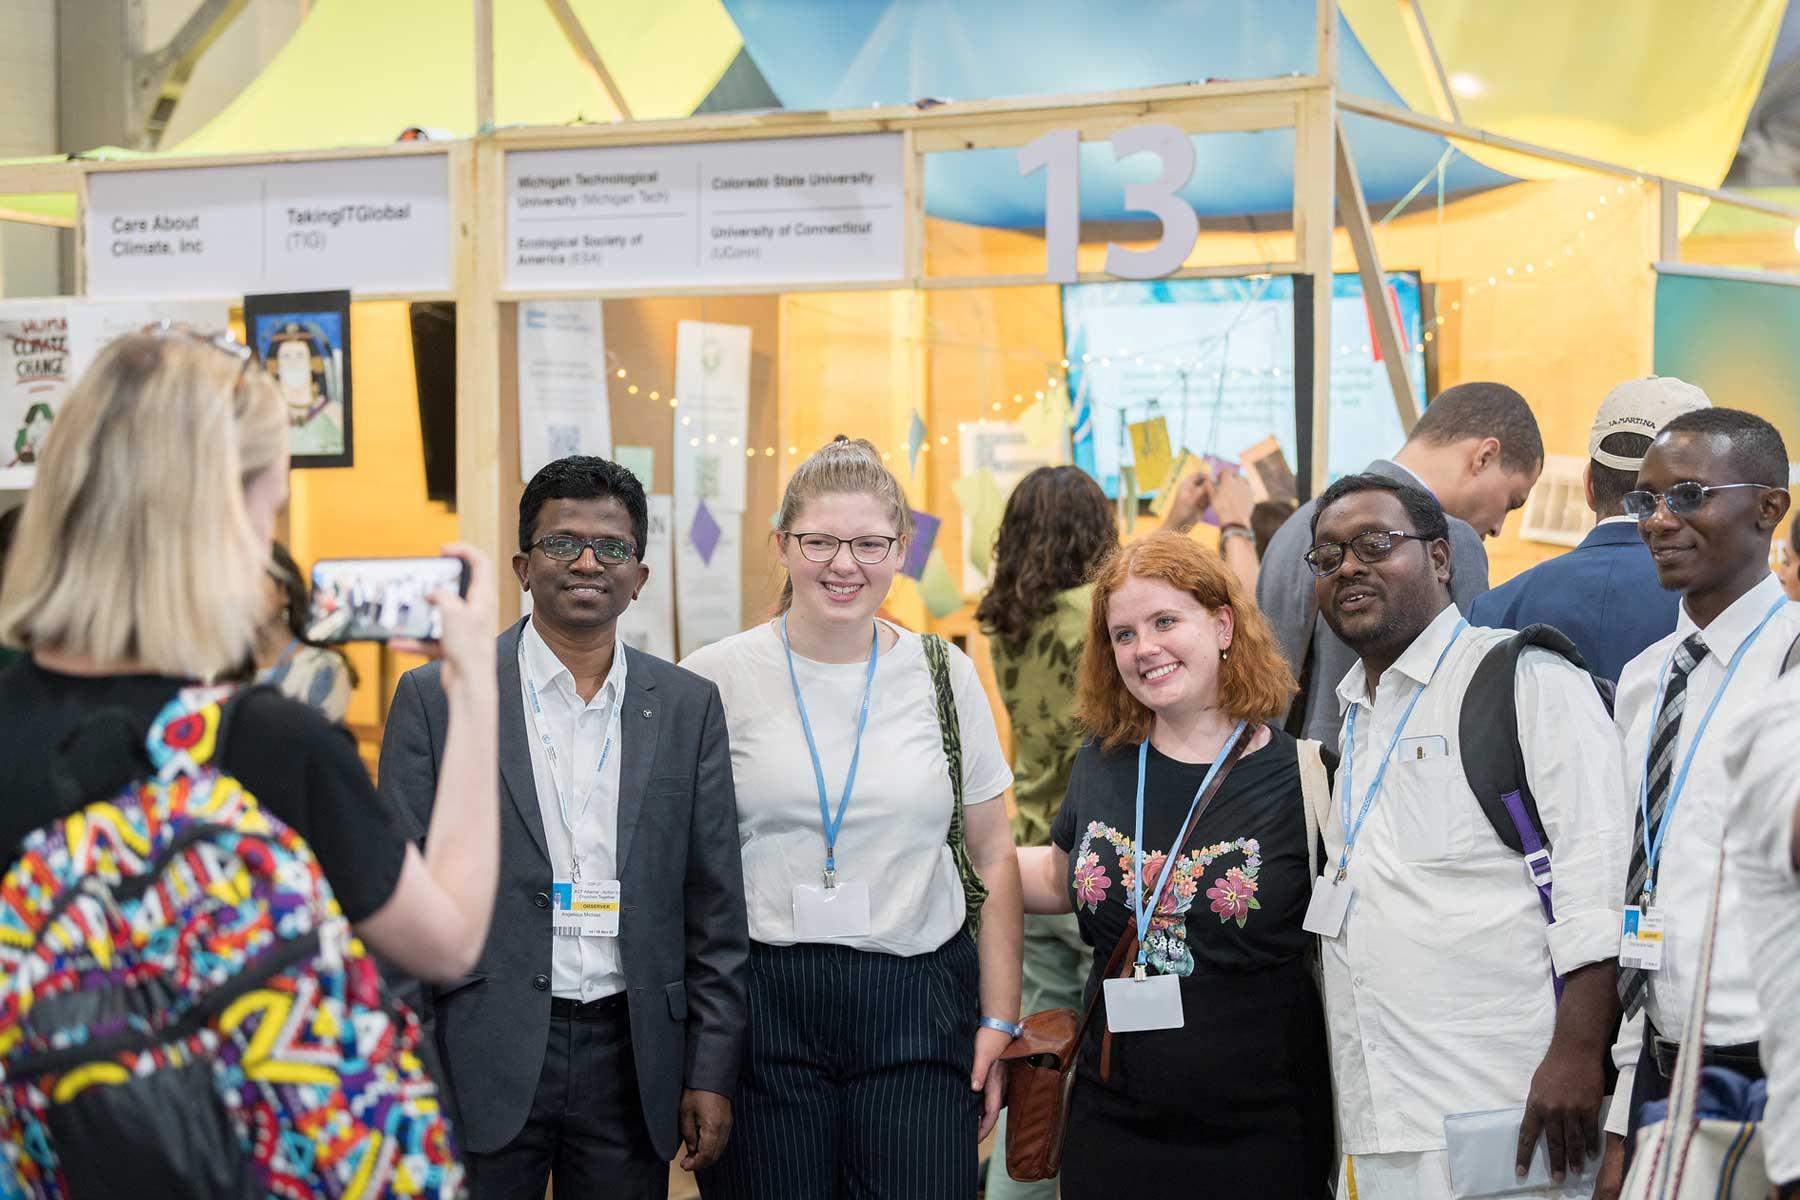 Youth engaged in climate advocacy at COP27: (from left) Angelious Michael (India), Michelle Schwarz (Germany), Laura Meloy (USA), Raj Kundra (India), Erik Kapira (Tanzania). Photo: LWF/Albin Hillert